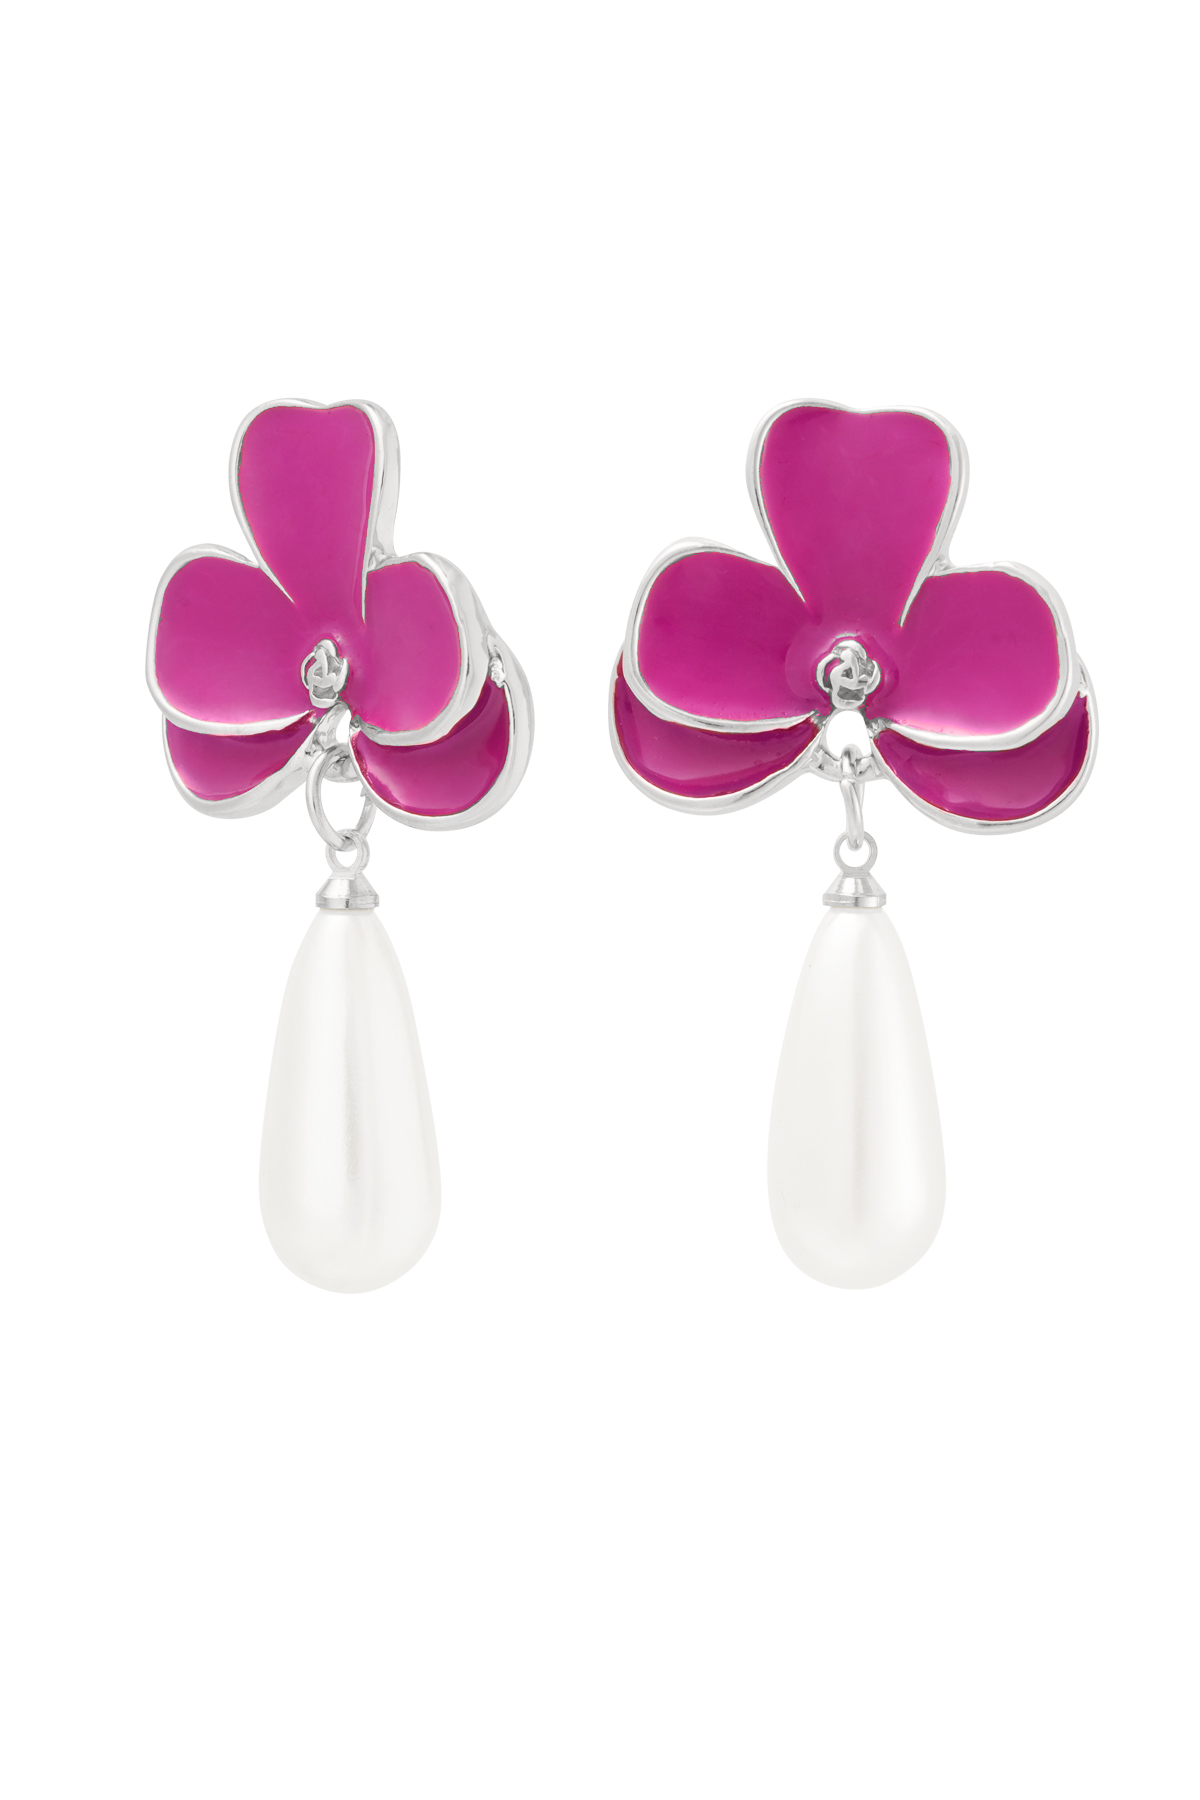 Earrings pink flower with pearl - silver h5 